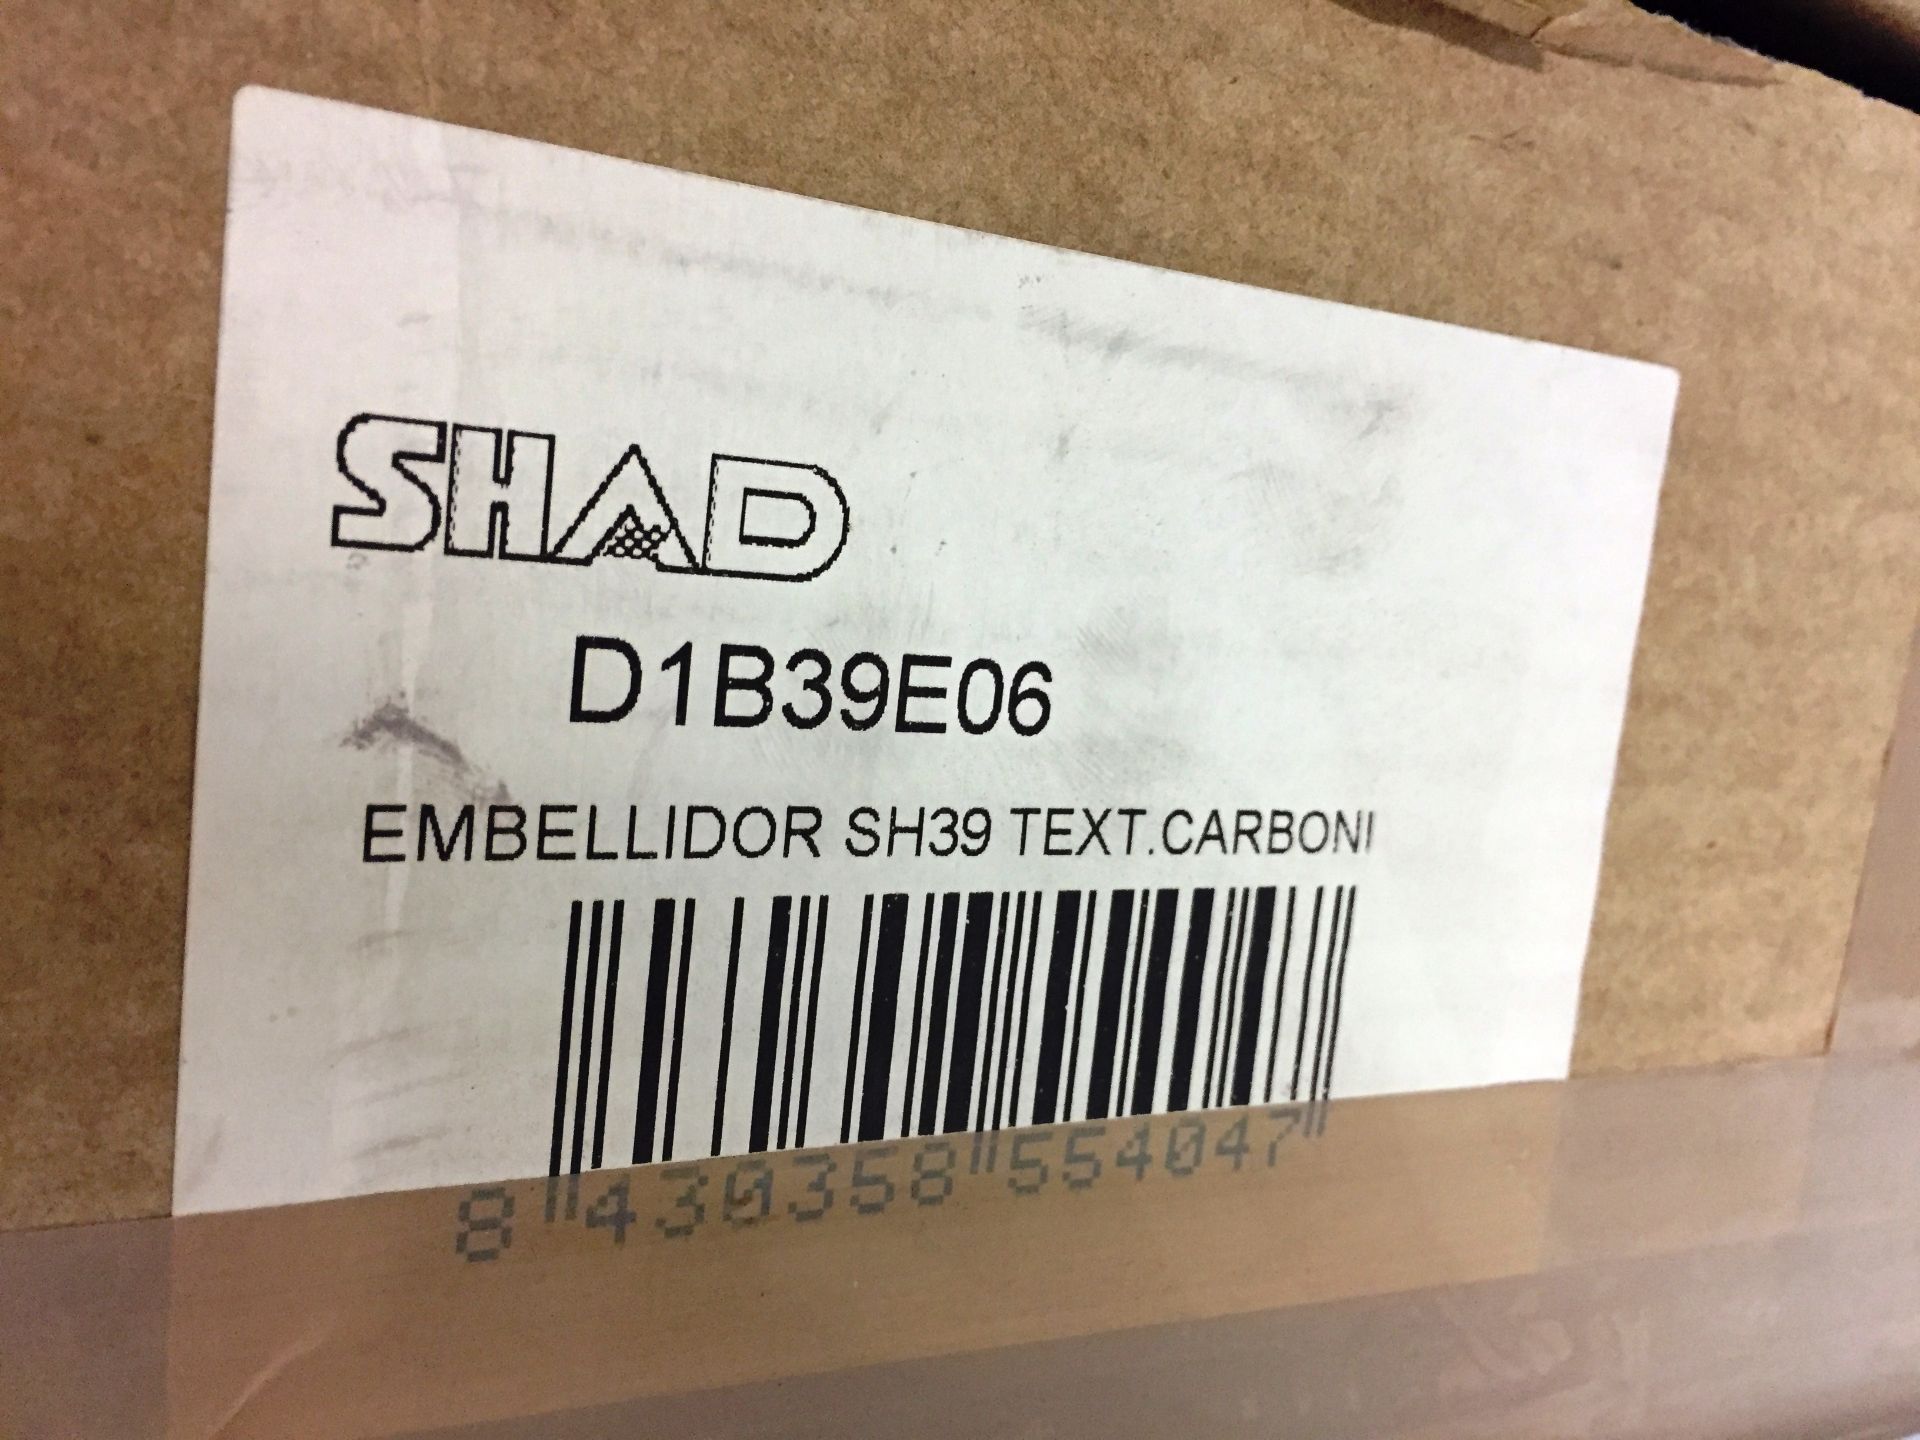 2 x Shad D1B39EO6 Top Case accessory cover plate | SH39 Carbon | RRP£24.99 each - Image 3 of 3